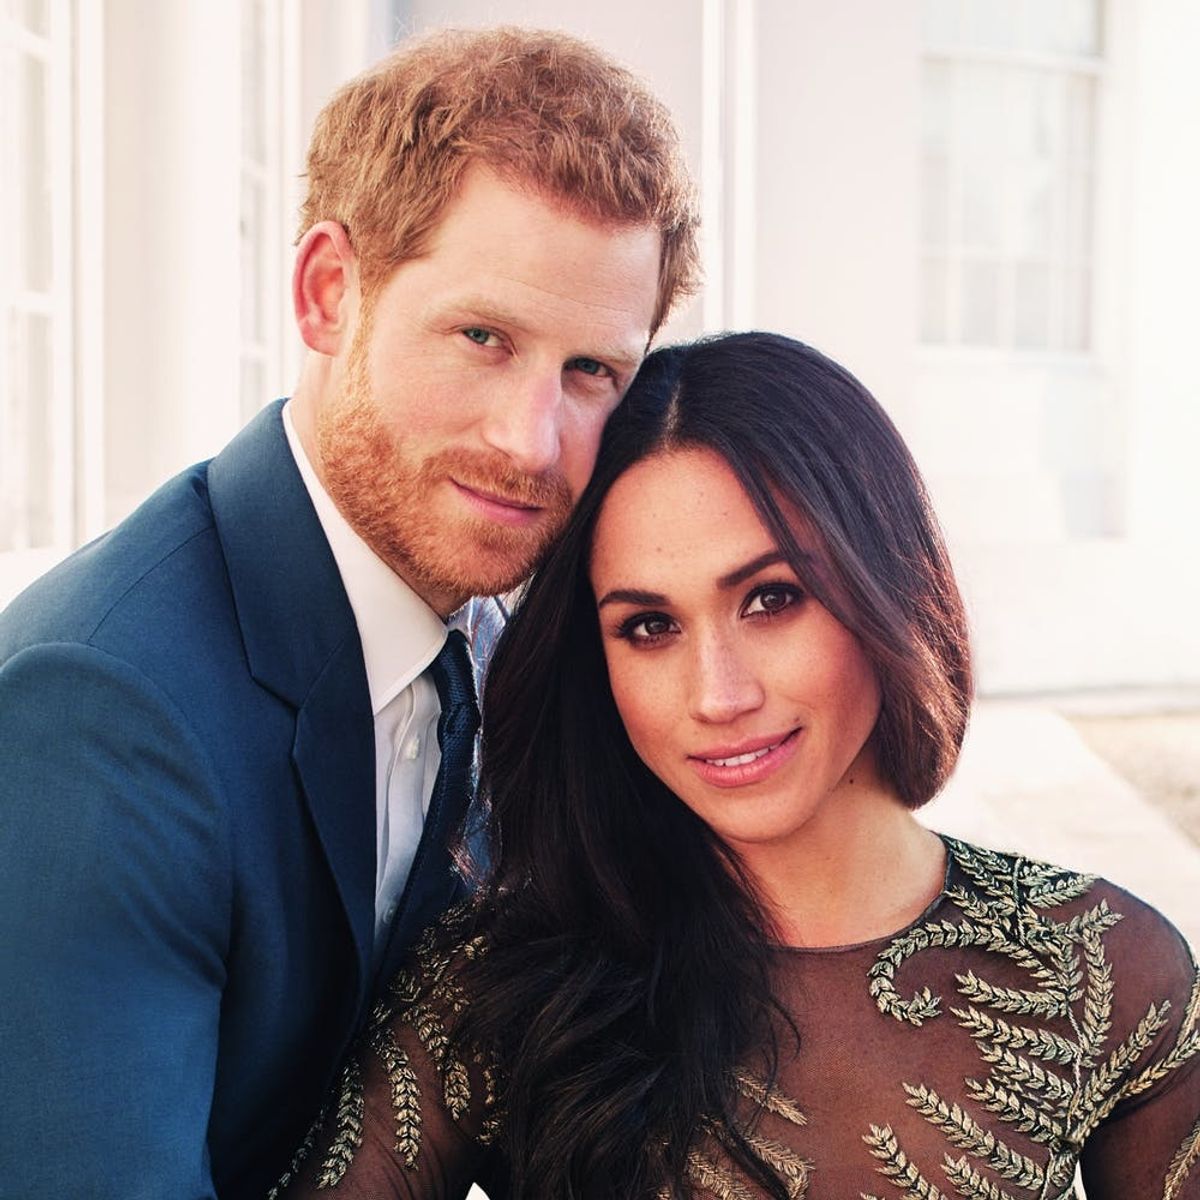 Meghan Markle’s Engagement Photo Style Is TOTALLY Different Than Kate Middleton’s 